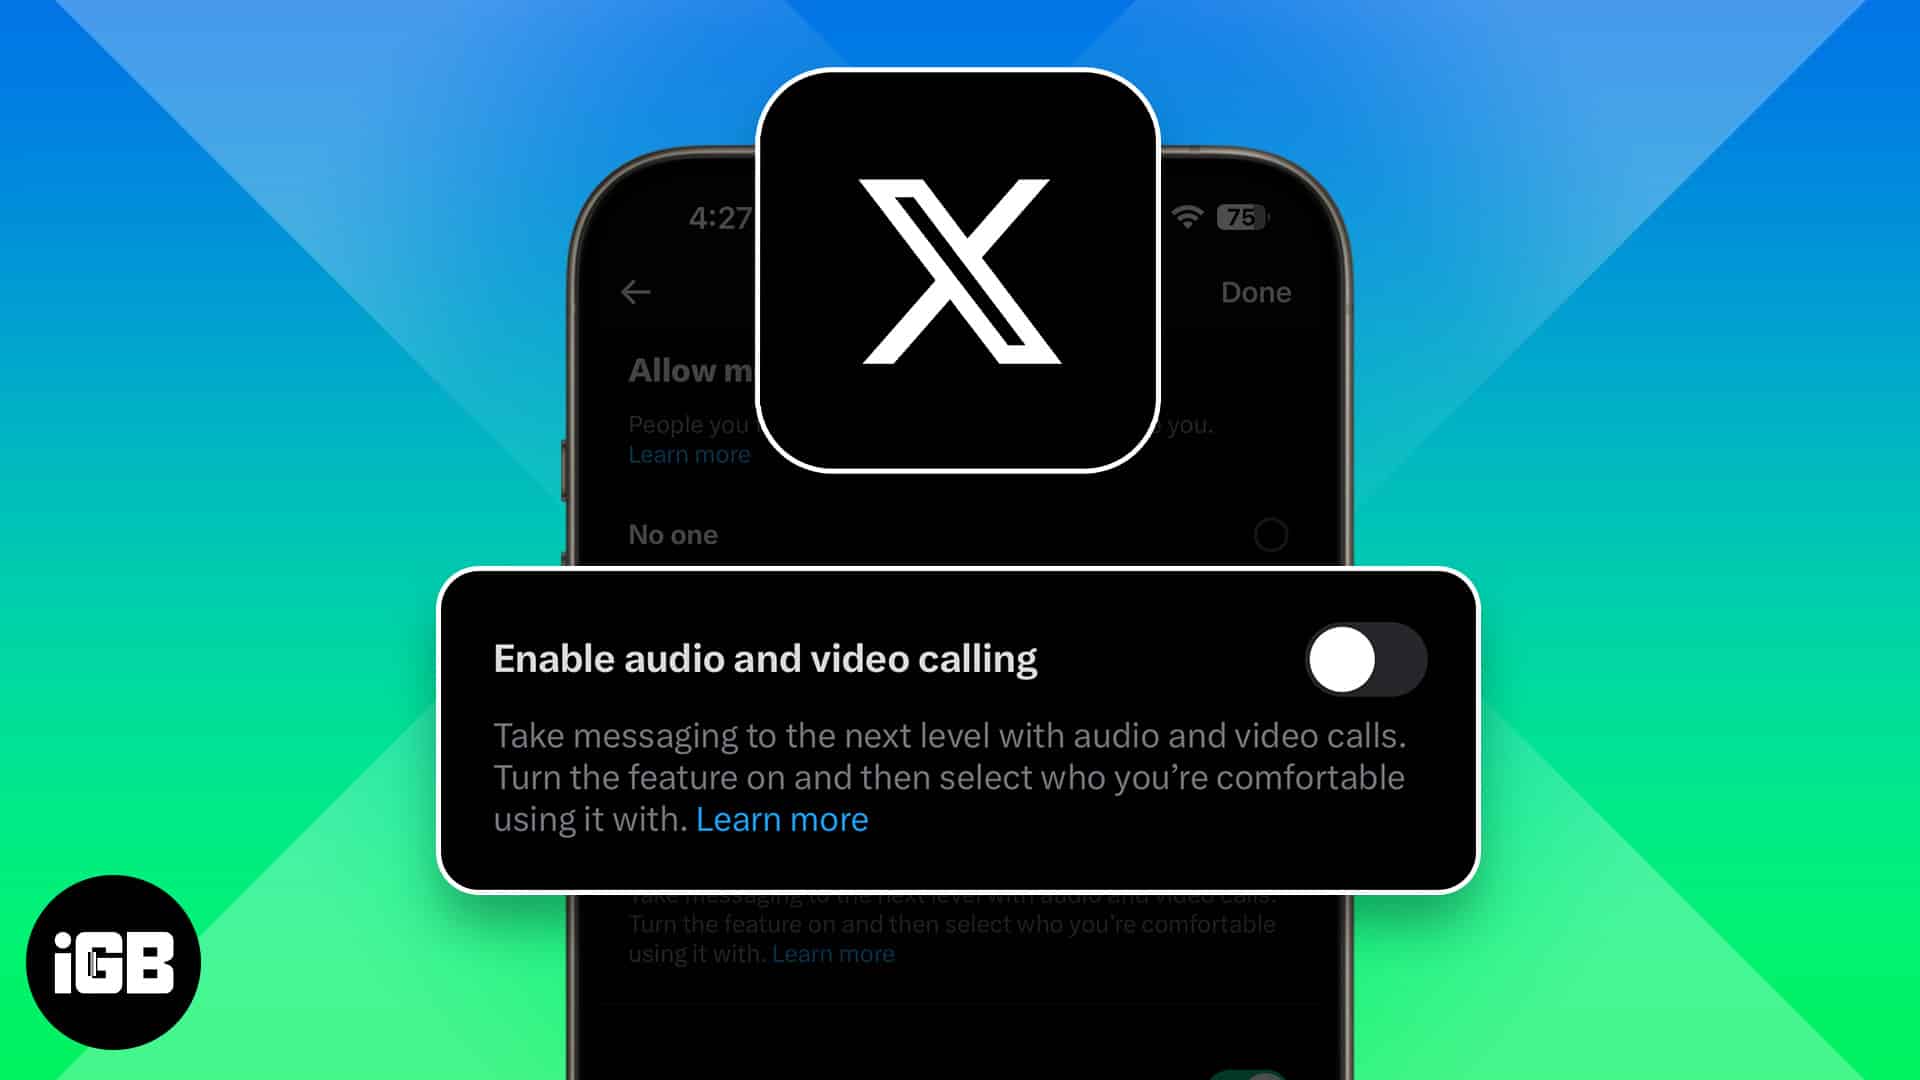 How to turn off audio and video calls on X